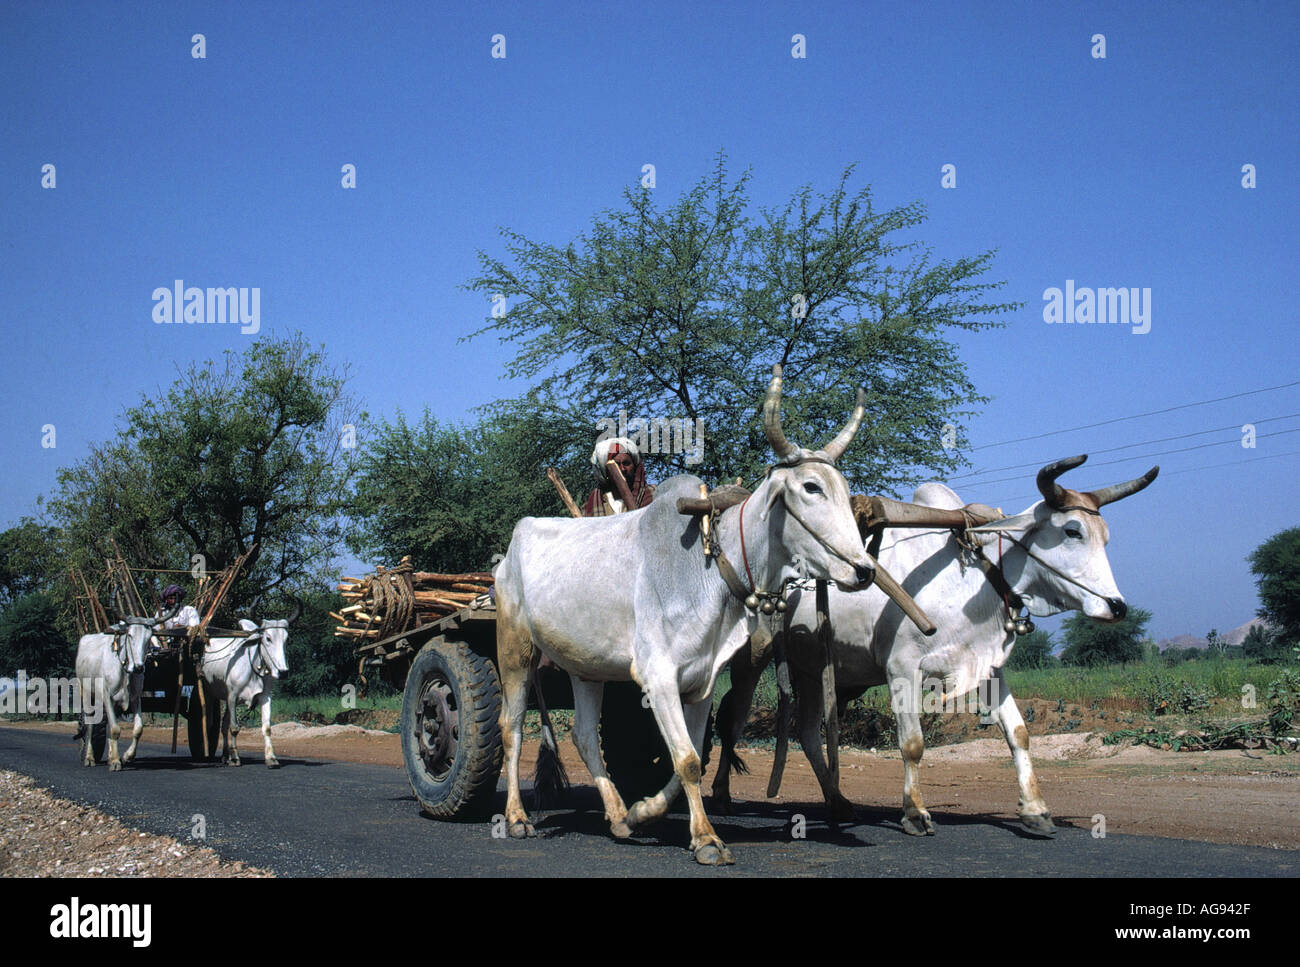 teams of oxen state of rajasthan india Stock Photo